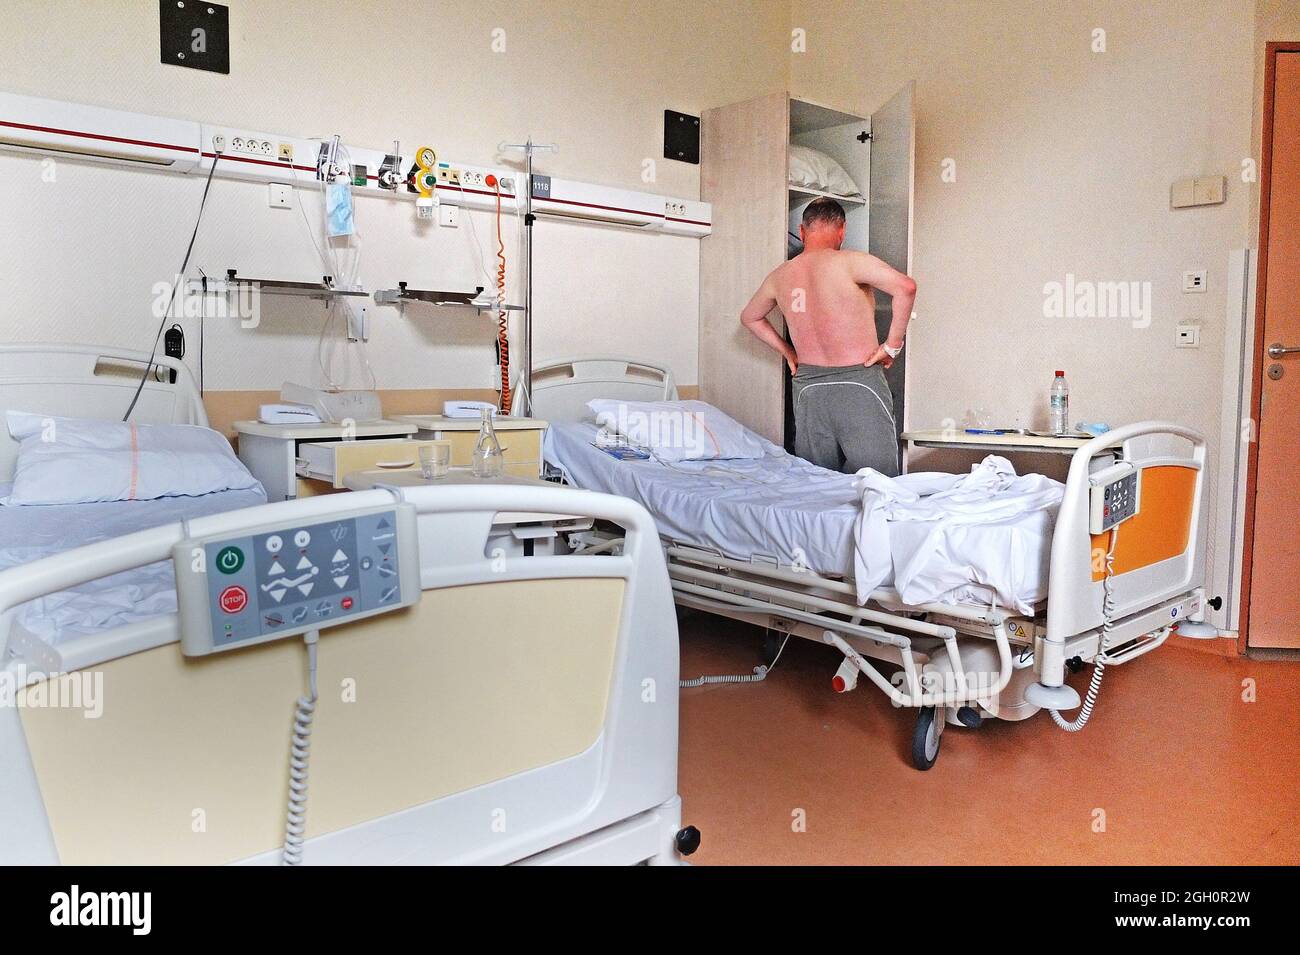 A patient in a hospital room dressing for discharge. Stock Photo